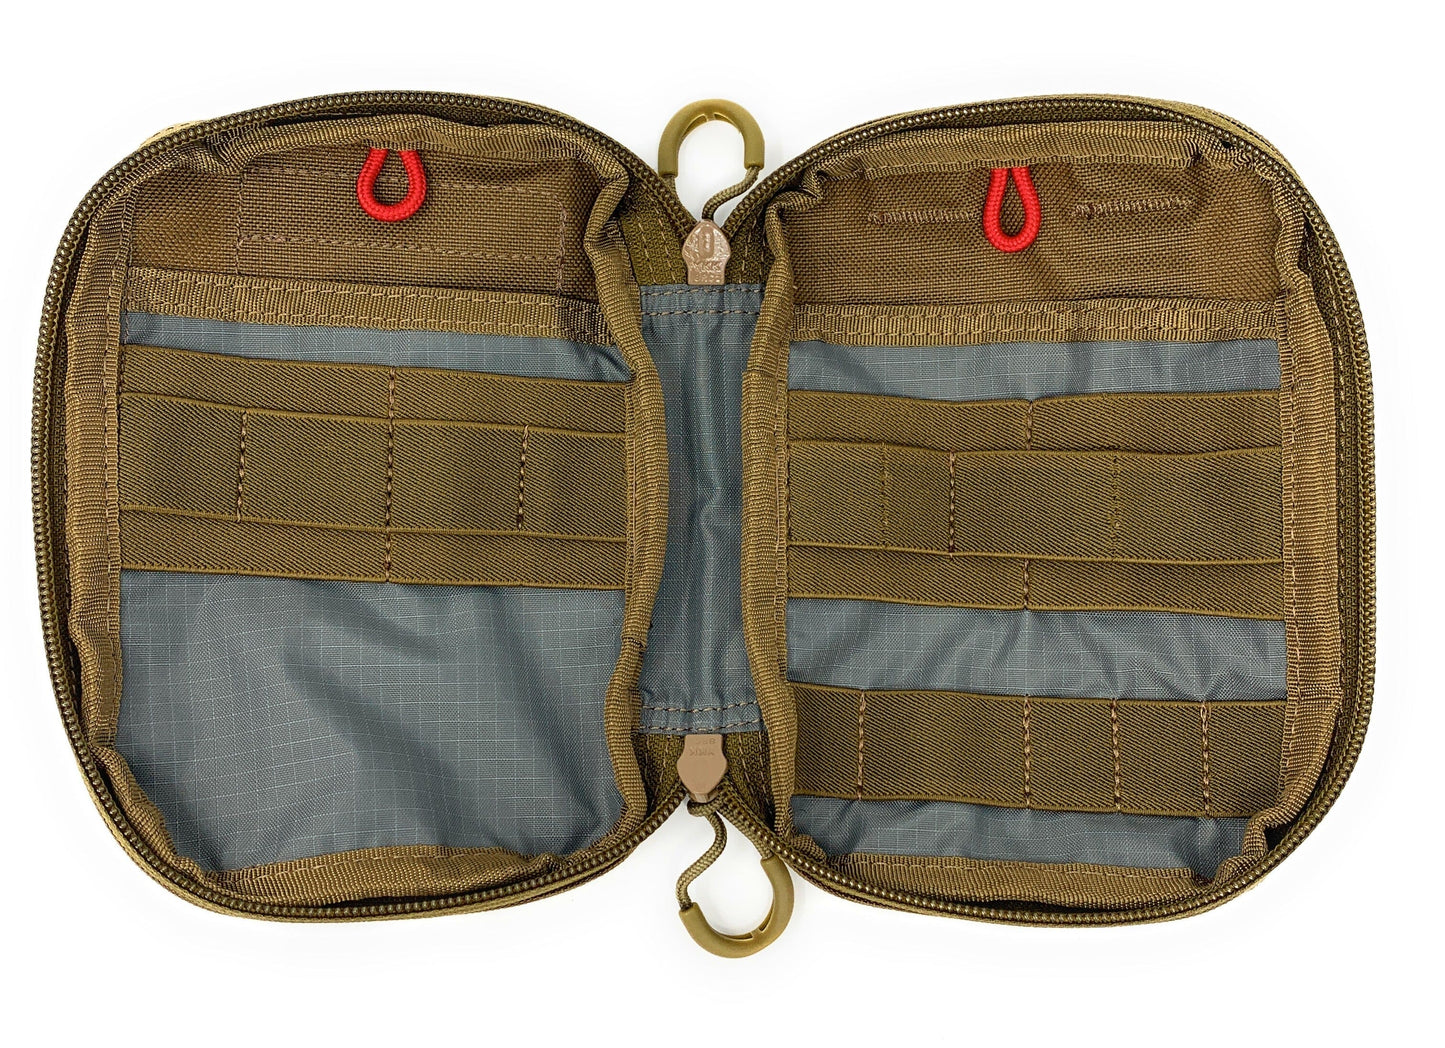 Limitless Equipment EDC-XS Utility Pouch. Bombproof storage for EDC, first aid kits and personal organisation (MOLLE) - Limitless Equipment